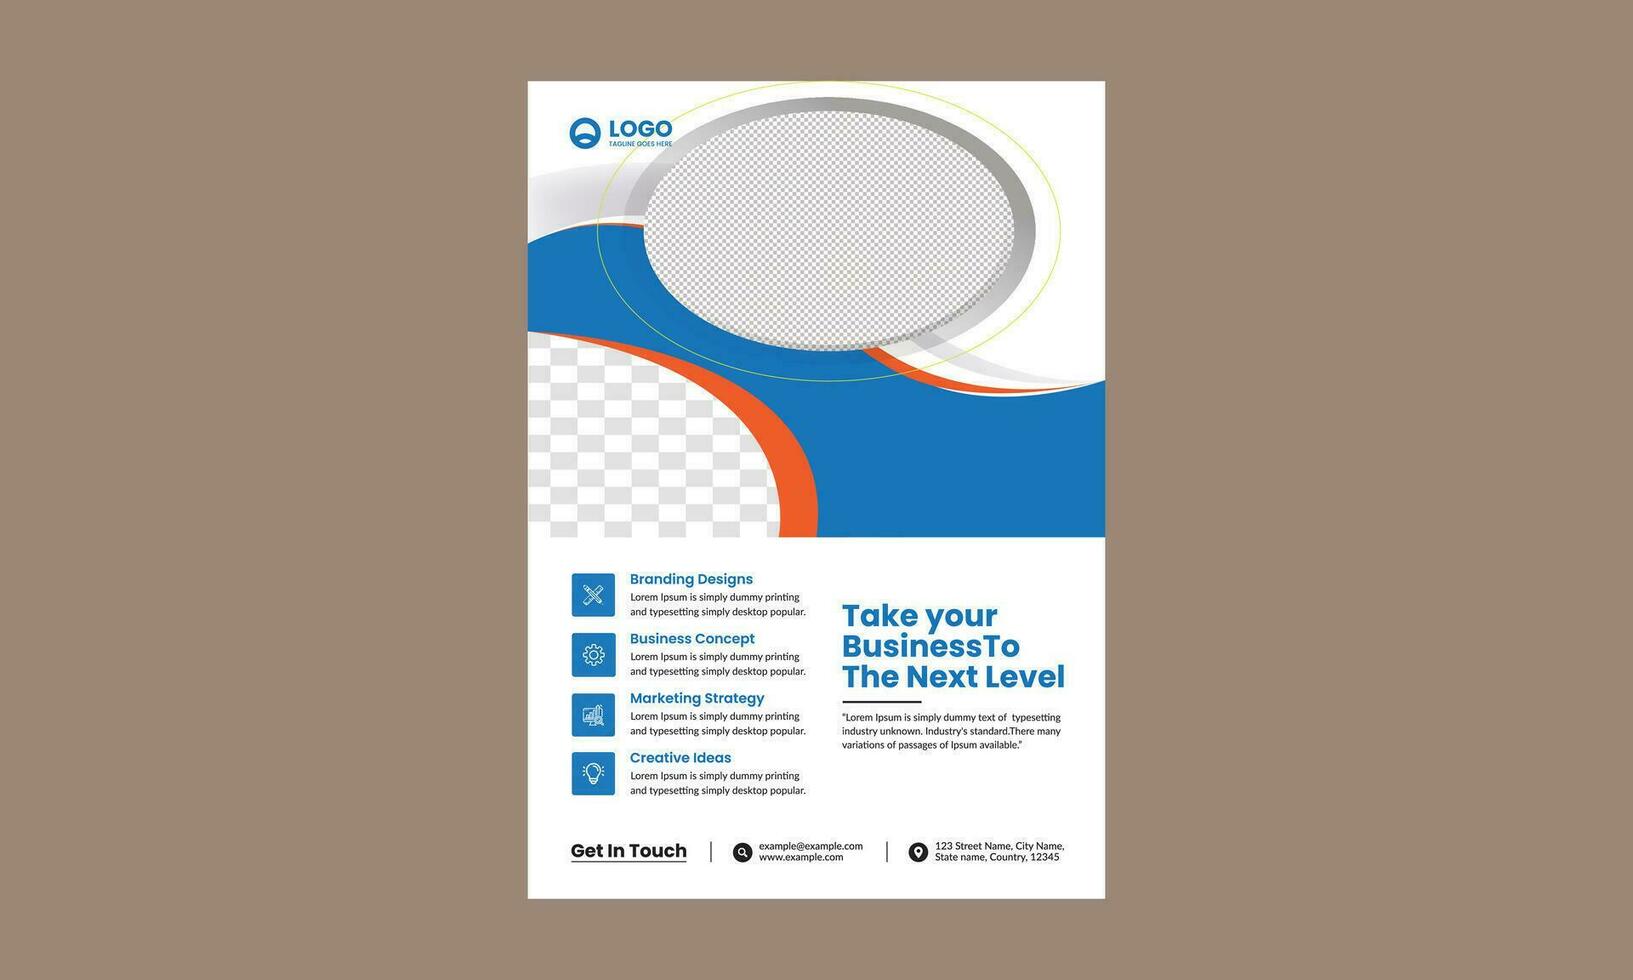 Corporate Book Cover Design Template in A4. Can be adapt to Brochure, Annual Report, Magazine,Poster, Business Presentation, Portfolio, Flyer, Banner, Website. vector